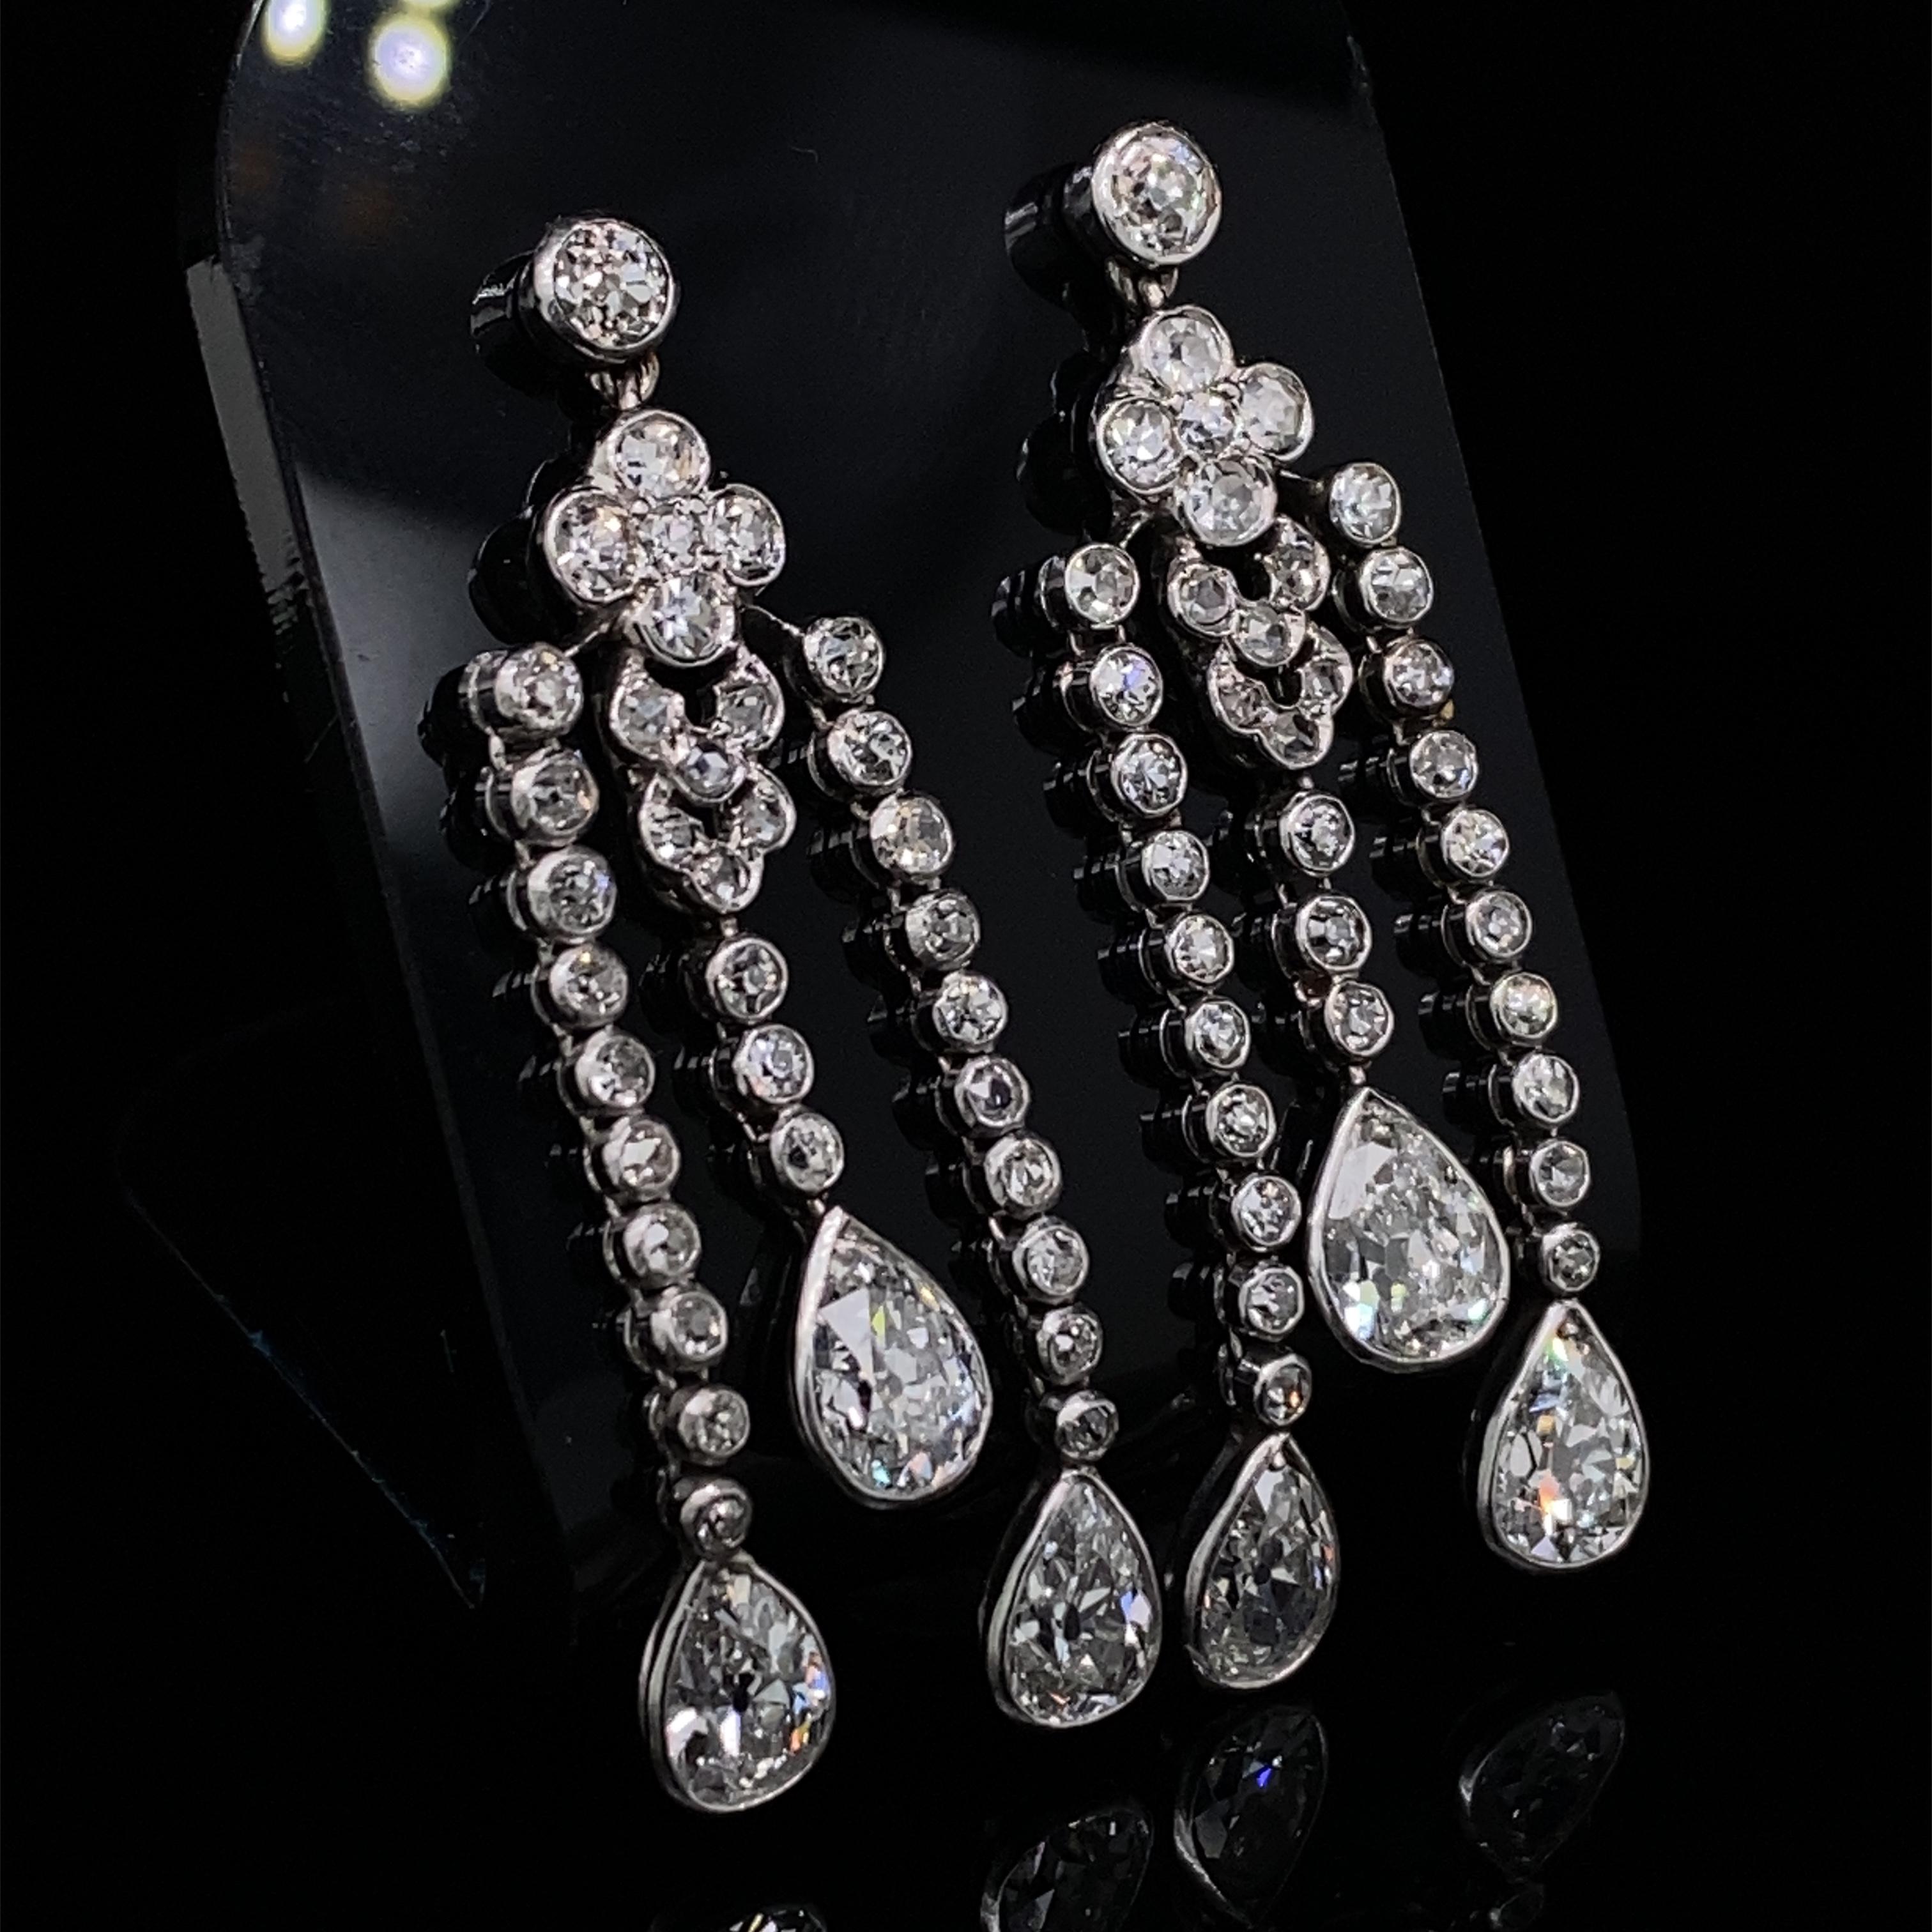 A pair of Edwardian diamond pendant drop earrings in platinum.

Each earring is designed with a floral set top, which suspend three diamond line drops all terminating in an elegant, individual rubover Old European pear-cut diamond.

All the stones